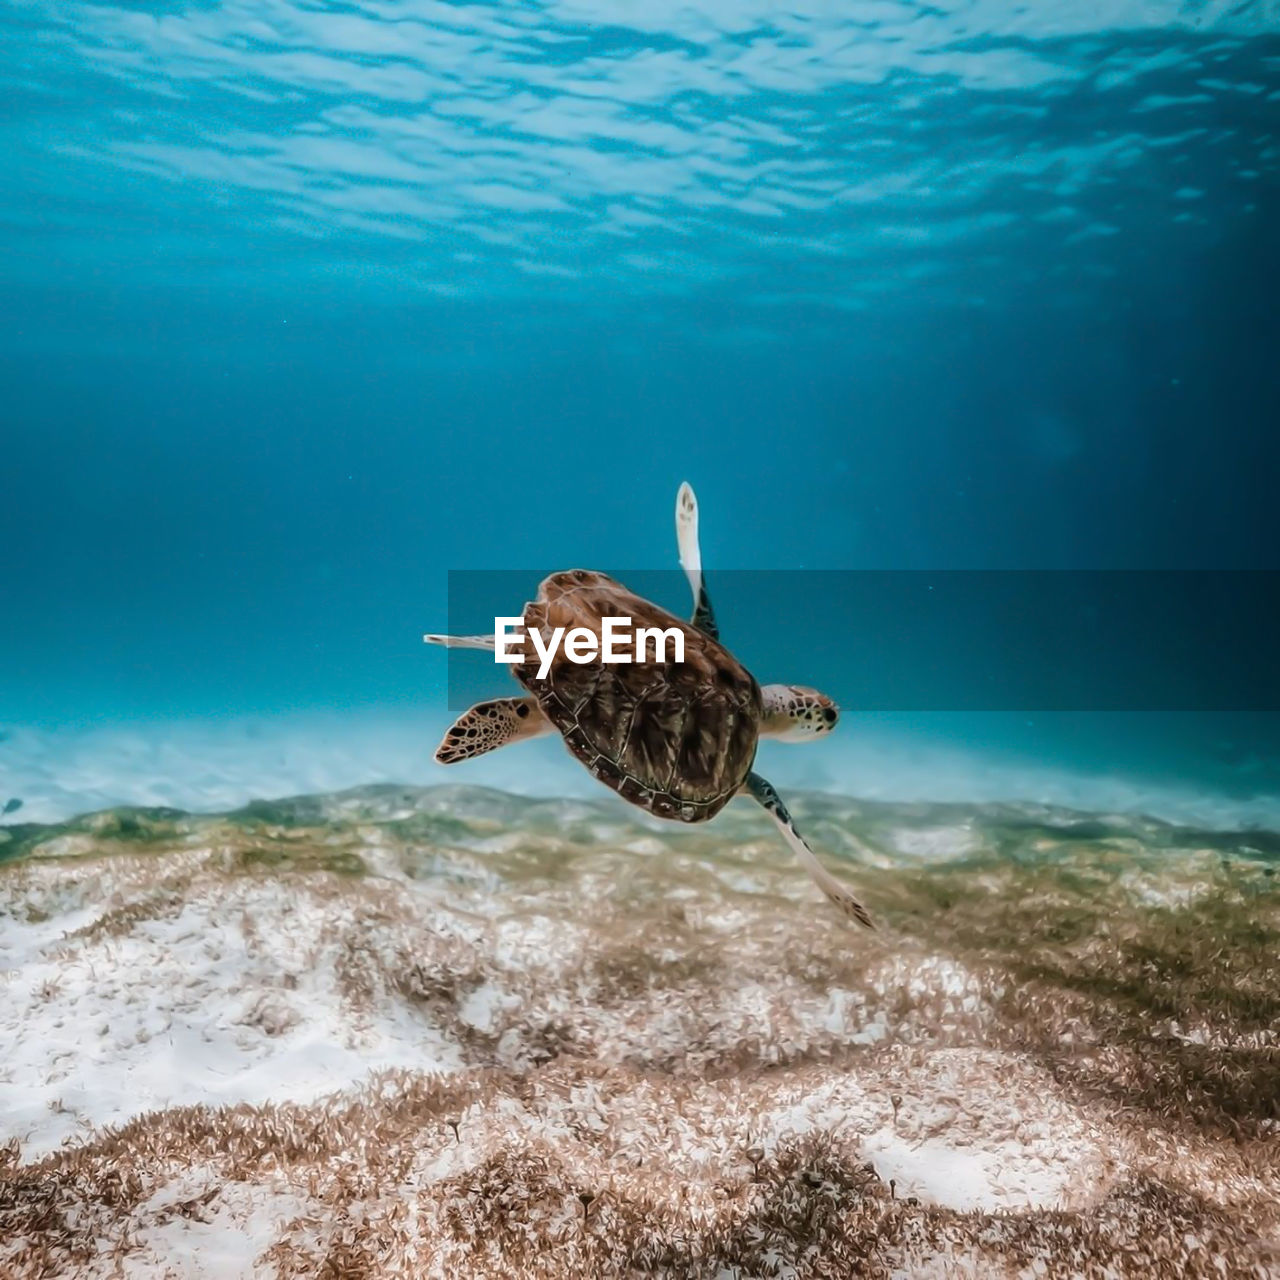 View of a tortoise swimming in sea